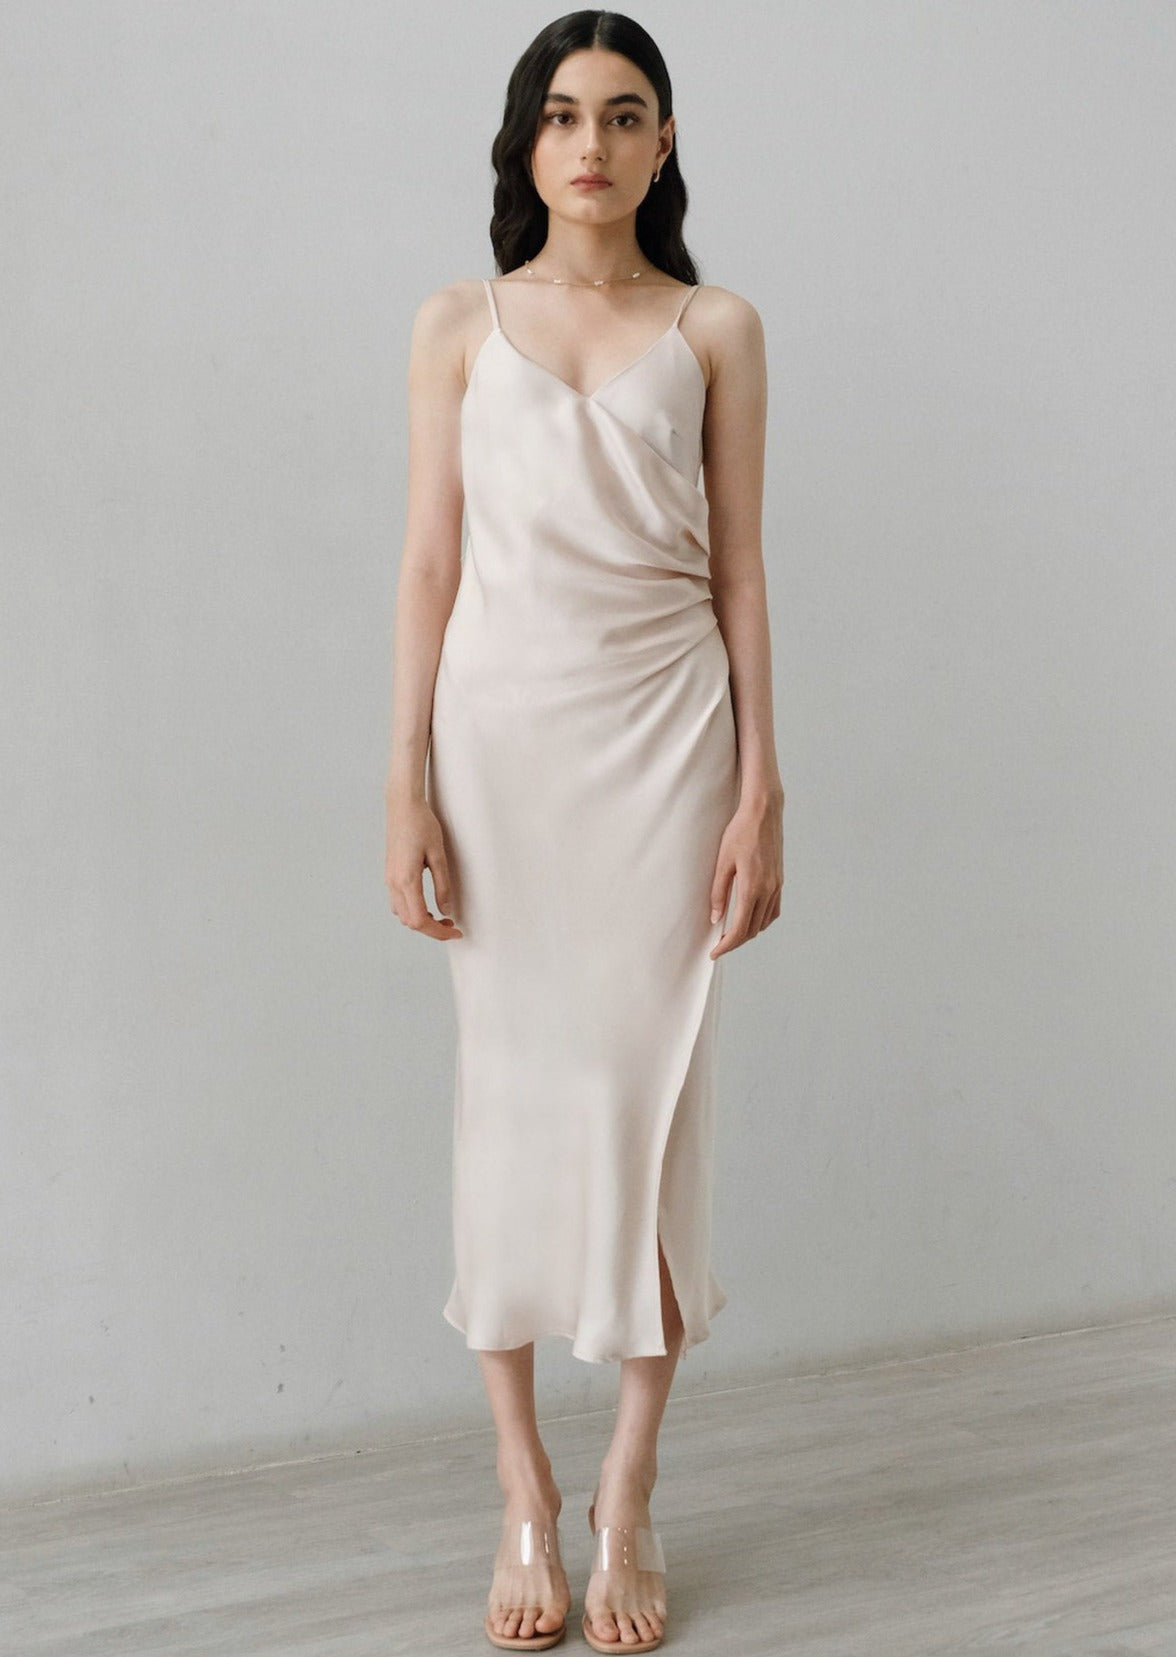 Caterina Dress In Champagne (4 Left)